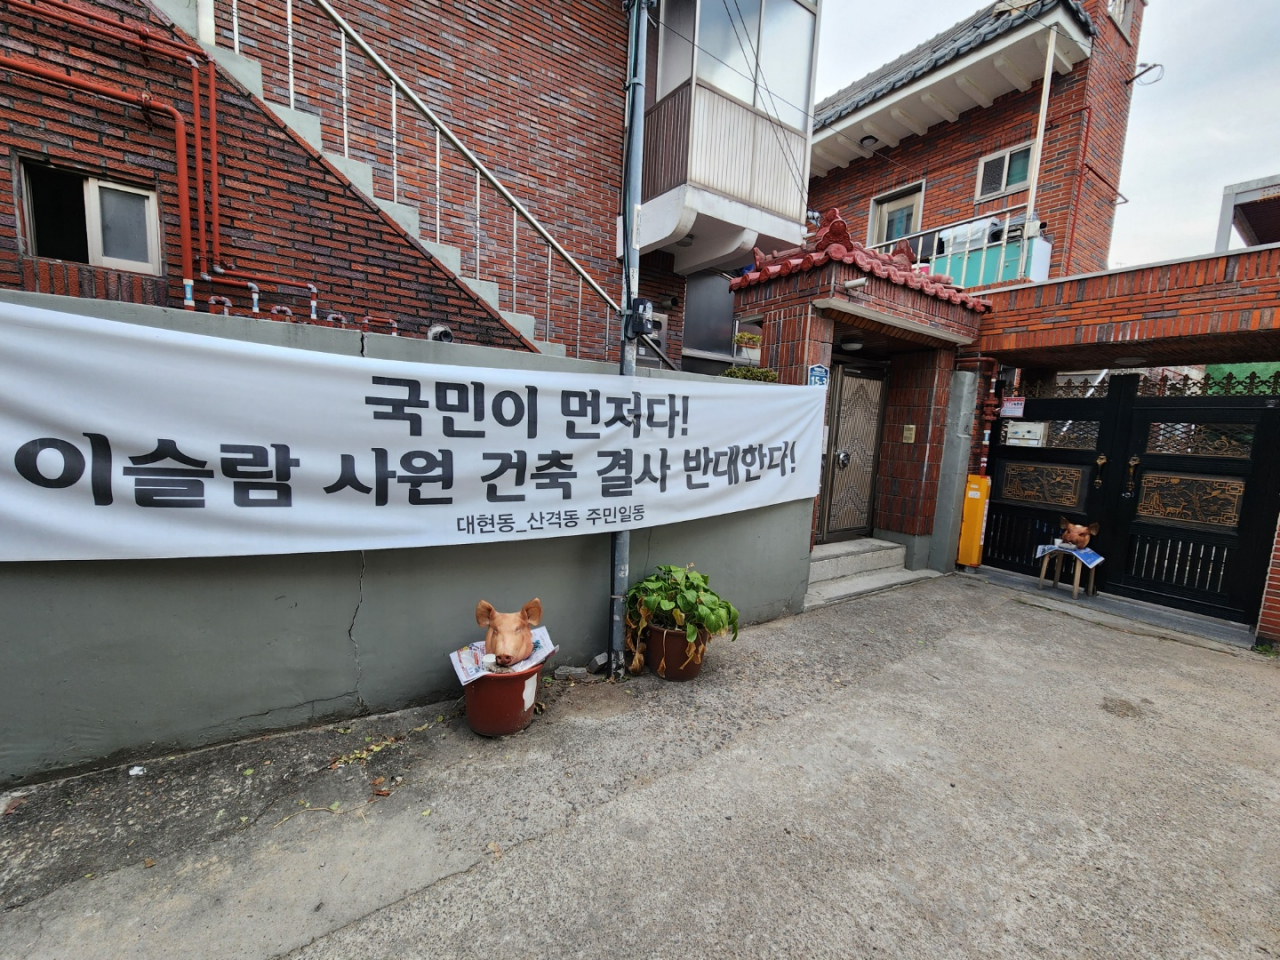 The heads of two dead pig are placed at a residential dead end in Daehyeong-dong, Daegu, where a mosque is being constructed, Wednesday afternoon. (Choi Jae-hee/The Korea Herald)